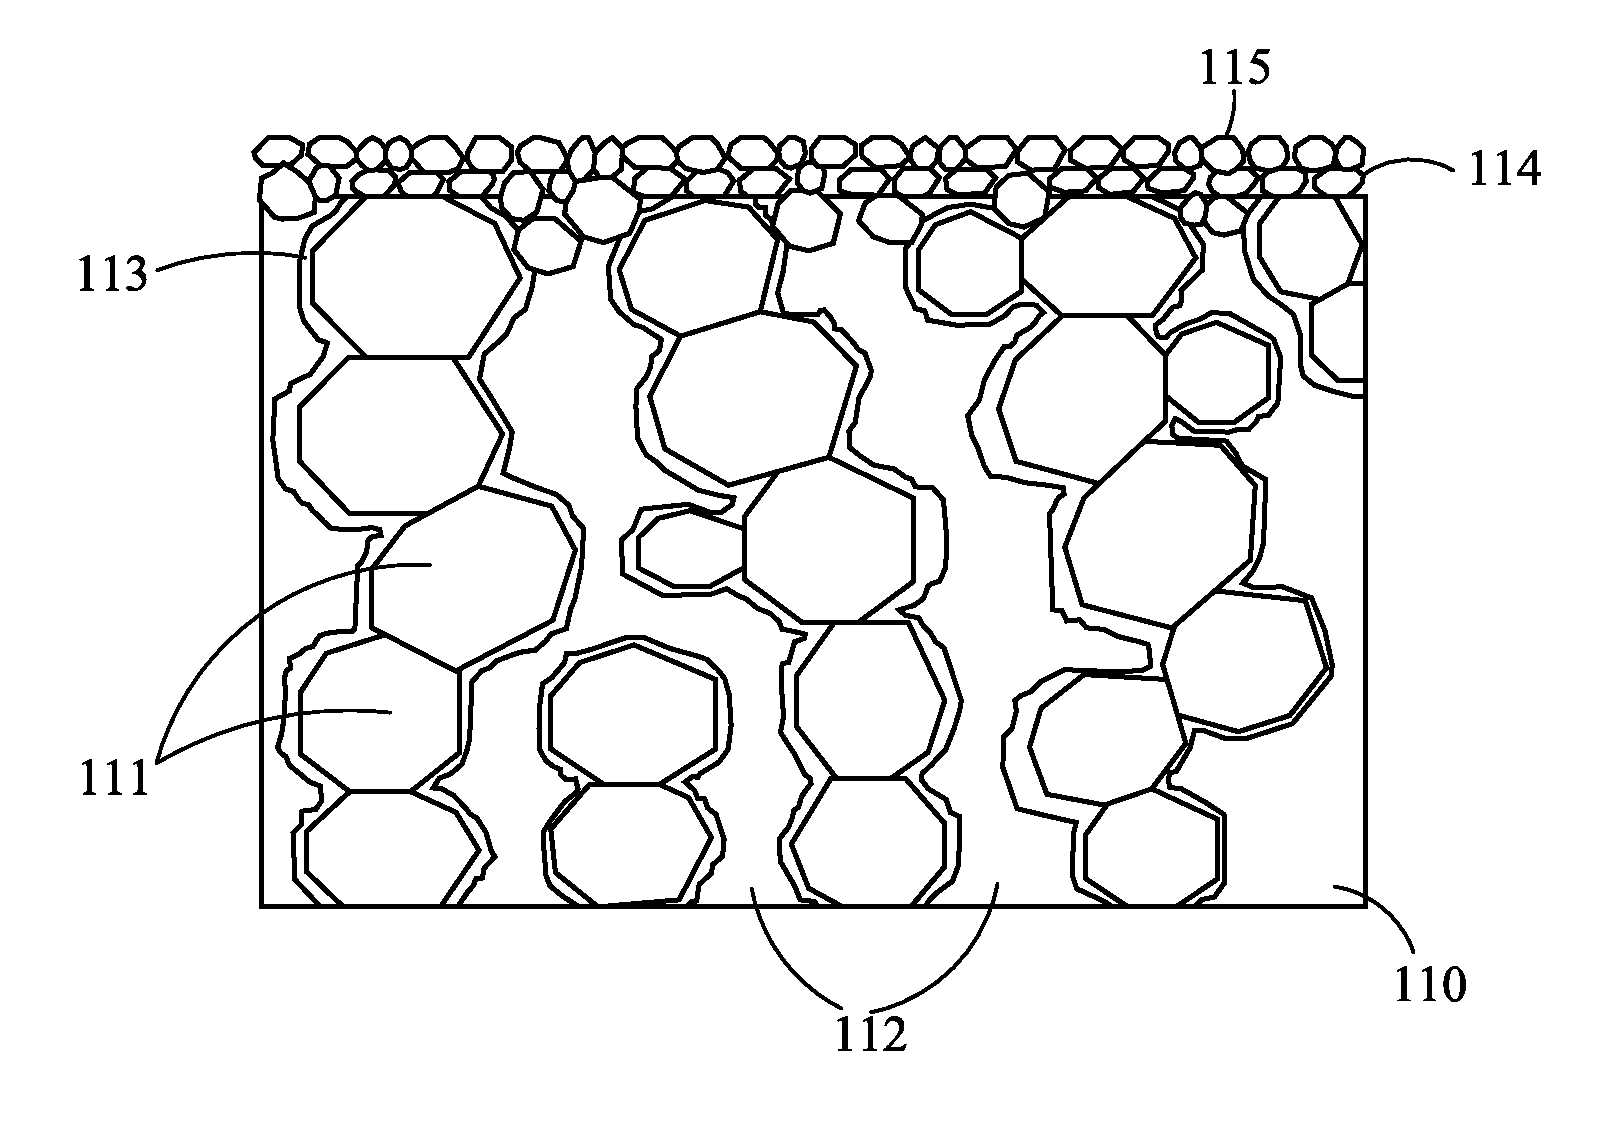 Porous metal substrate structure for a solid oxide fuel cell